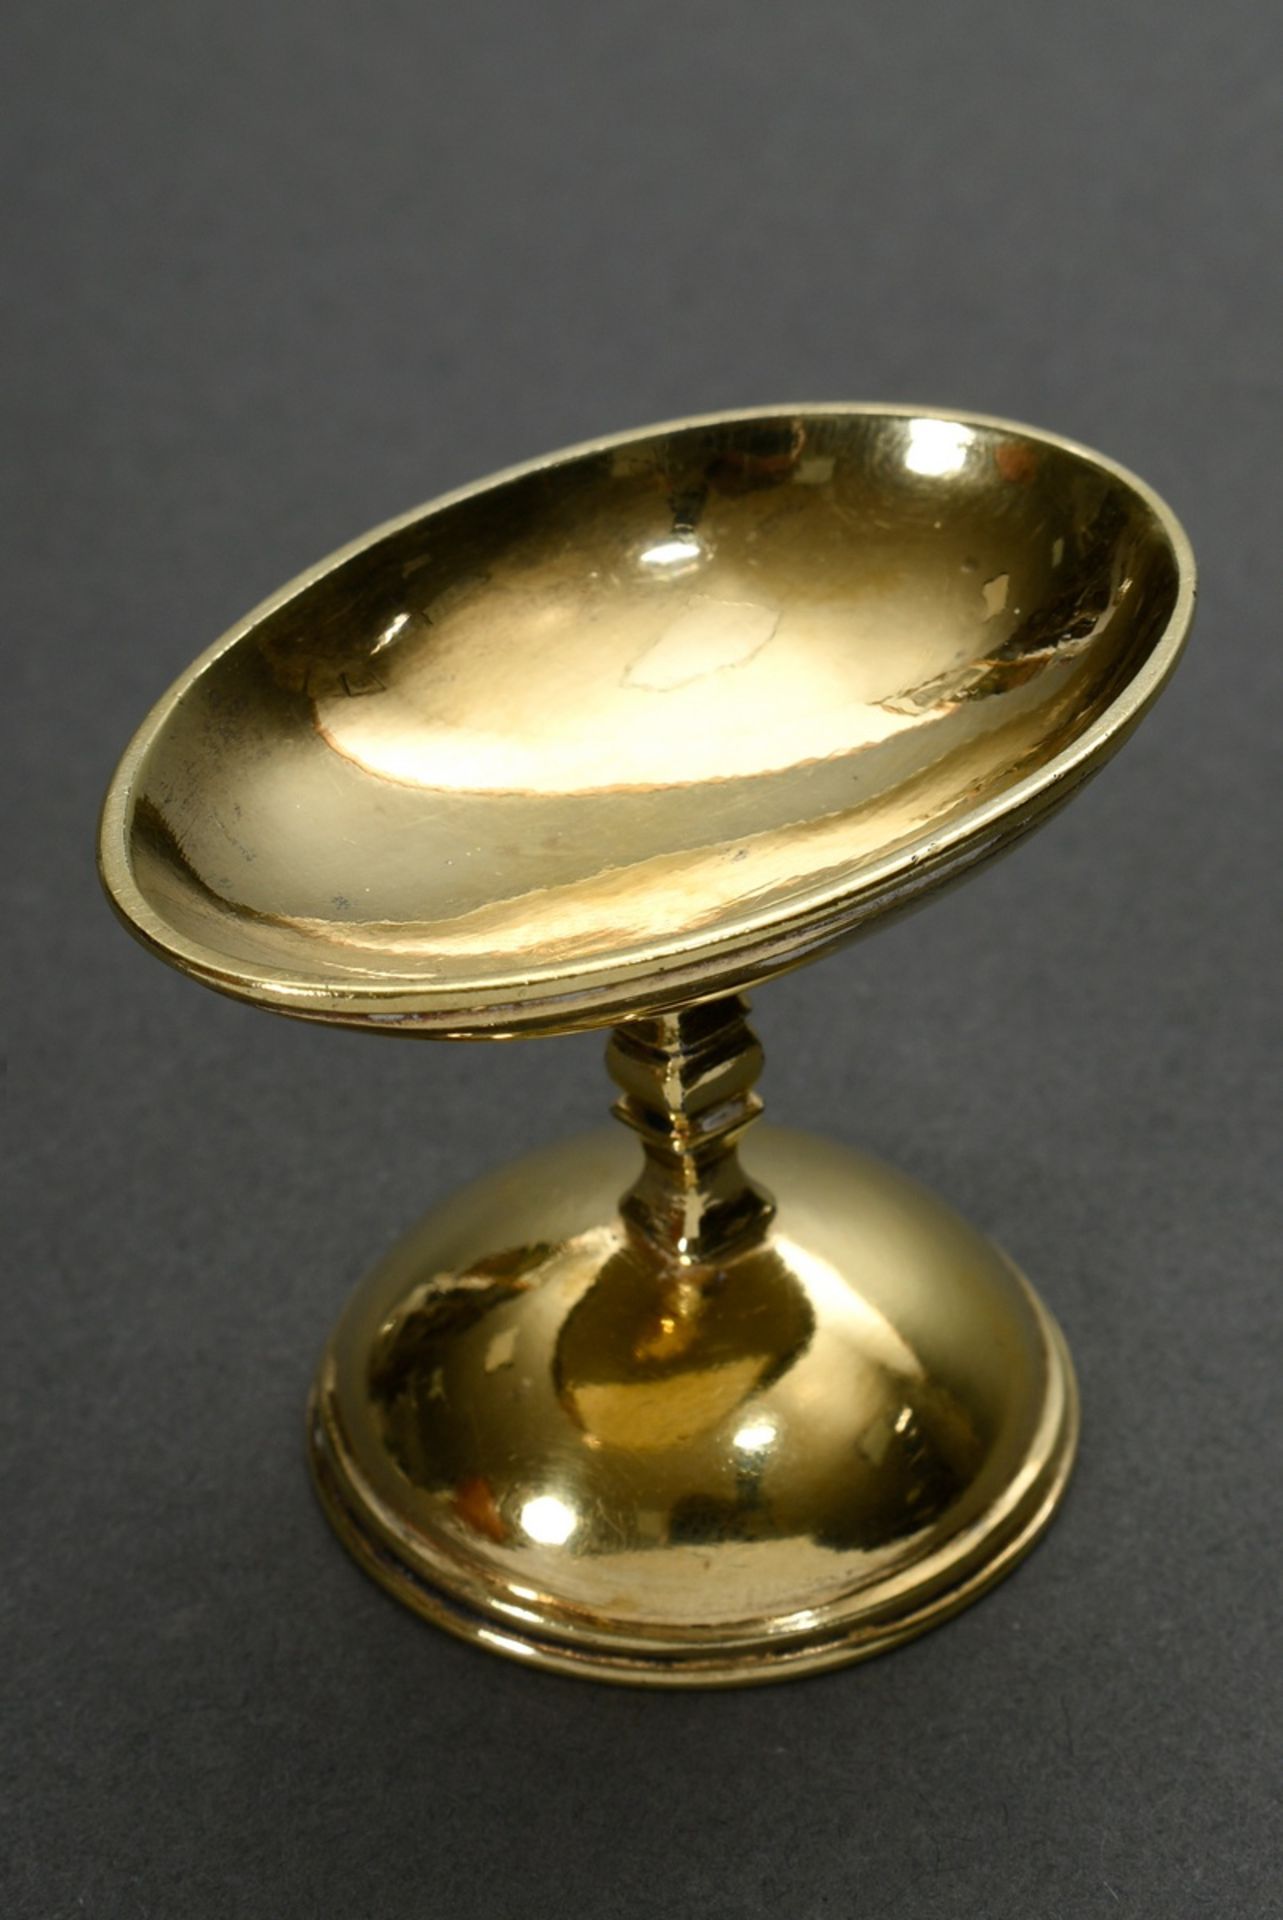 Antique egg cup made of ovoid foot part with angular baluster shaft and hemispherical vessel, proba